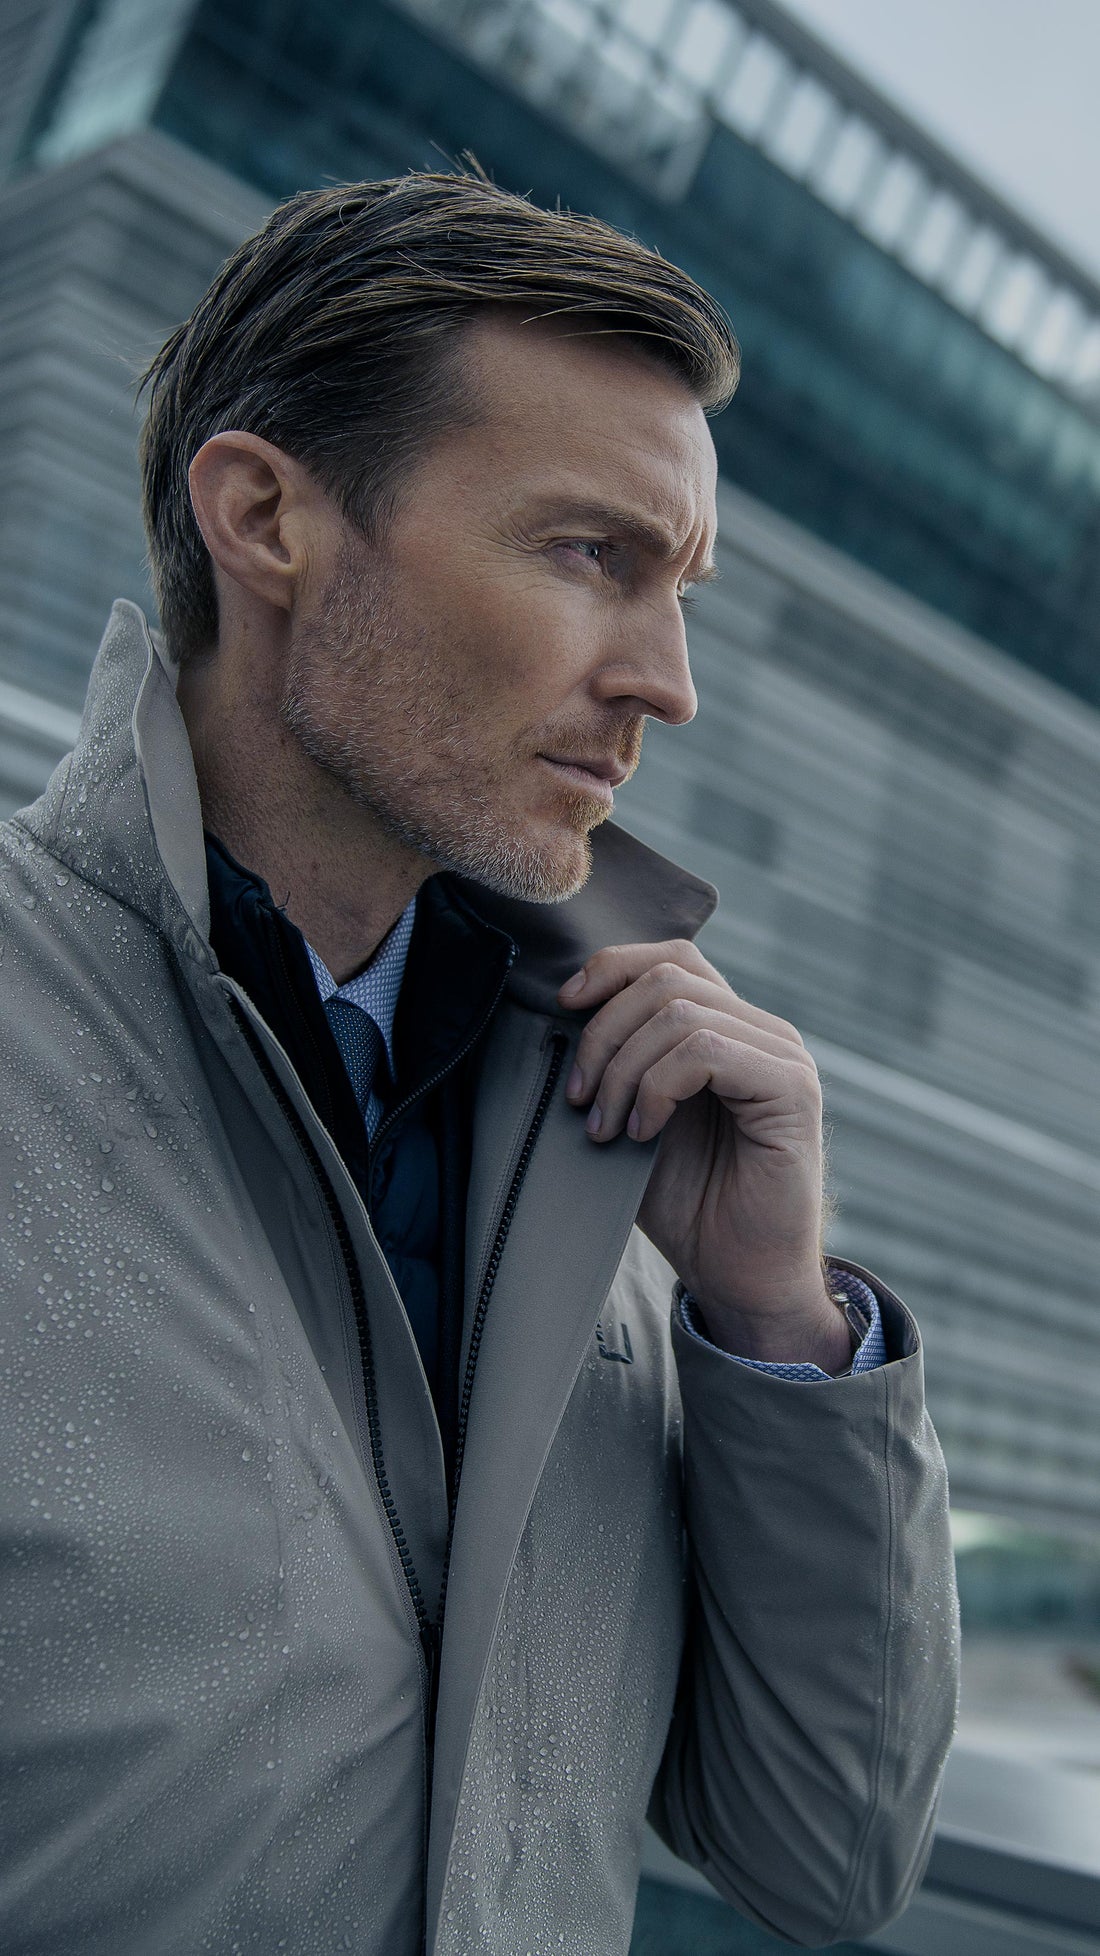 UBR: Technology + Tailoring | Elegant Outerwear for Men and Women – ubr.no